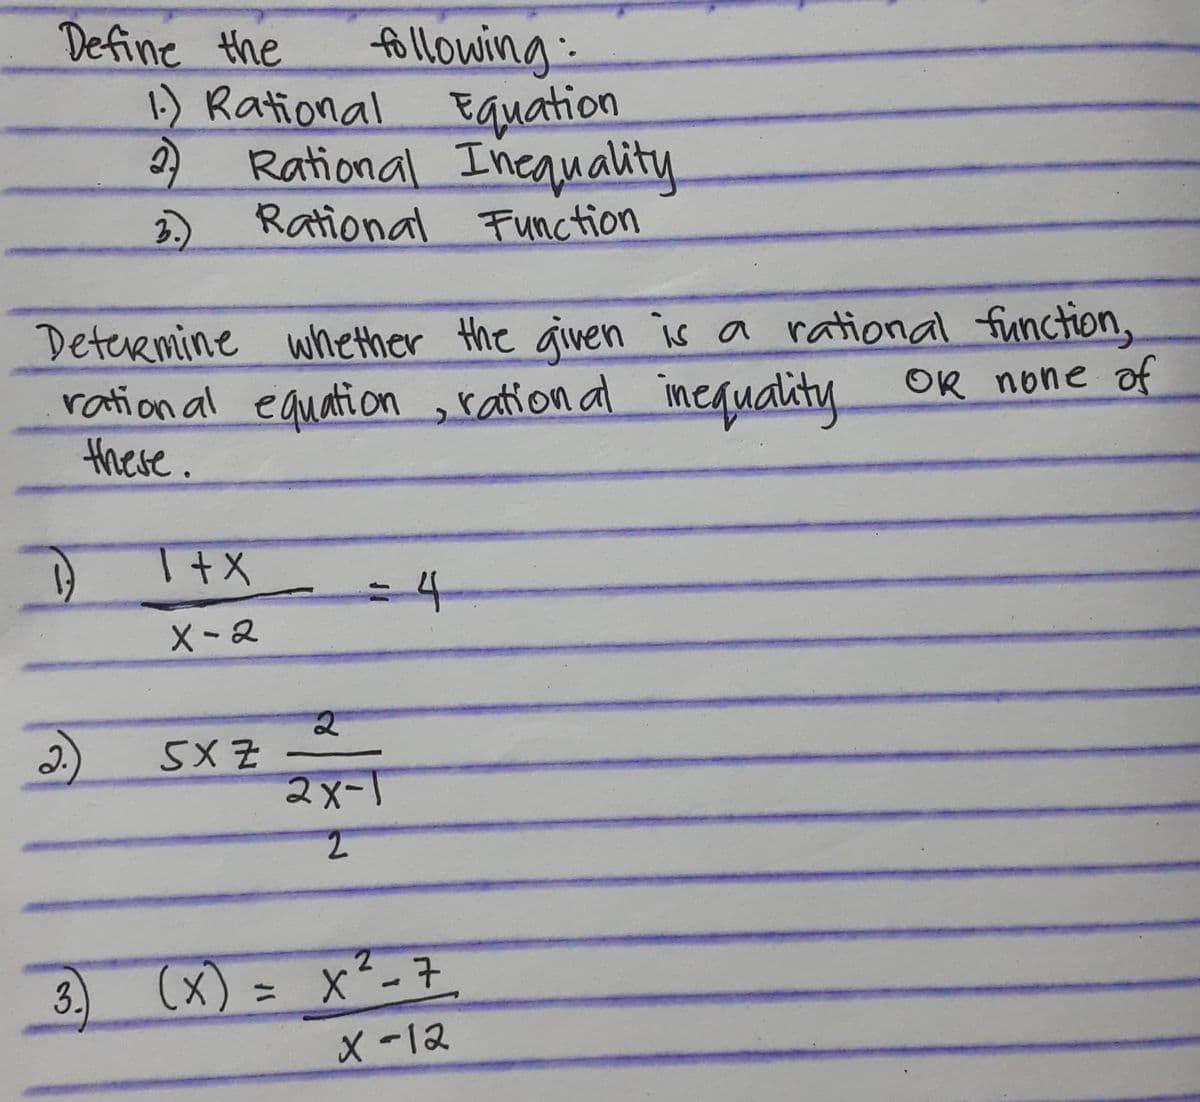 Define the
Determine whether the given is a rational function,
rational equation, rational inequality OR none of
these.
1
following:
1.) Rational Equation
2) Rational Inequality.
3.) Rational Function
2.
3.
1+X
X-2
5XZ
(x)
-
2
= 4
2x-1
2
2
x²-7
X-12